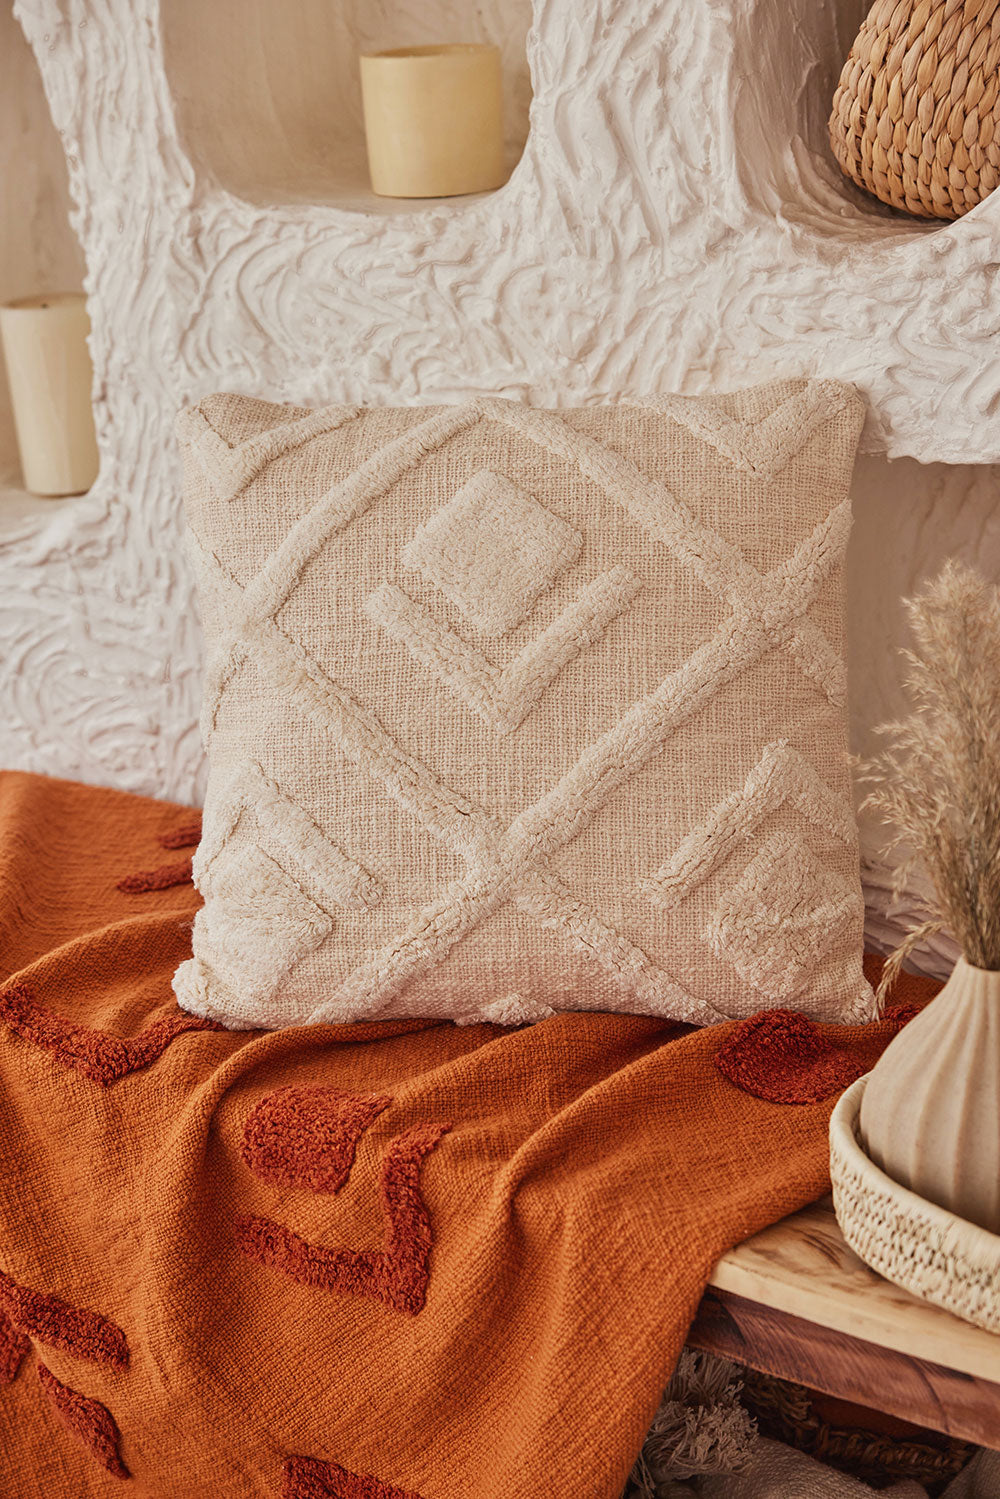 Tufted Pillow - Off White - 18x18 Inch